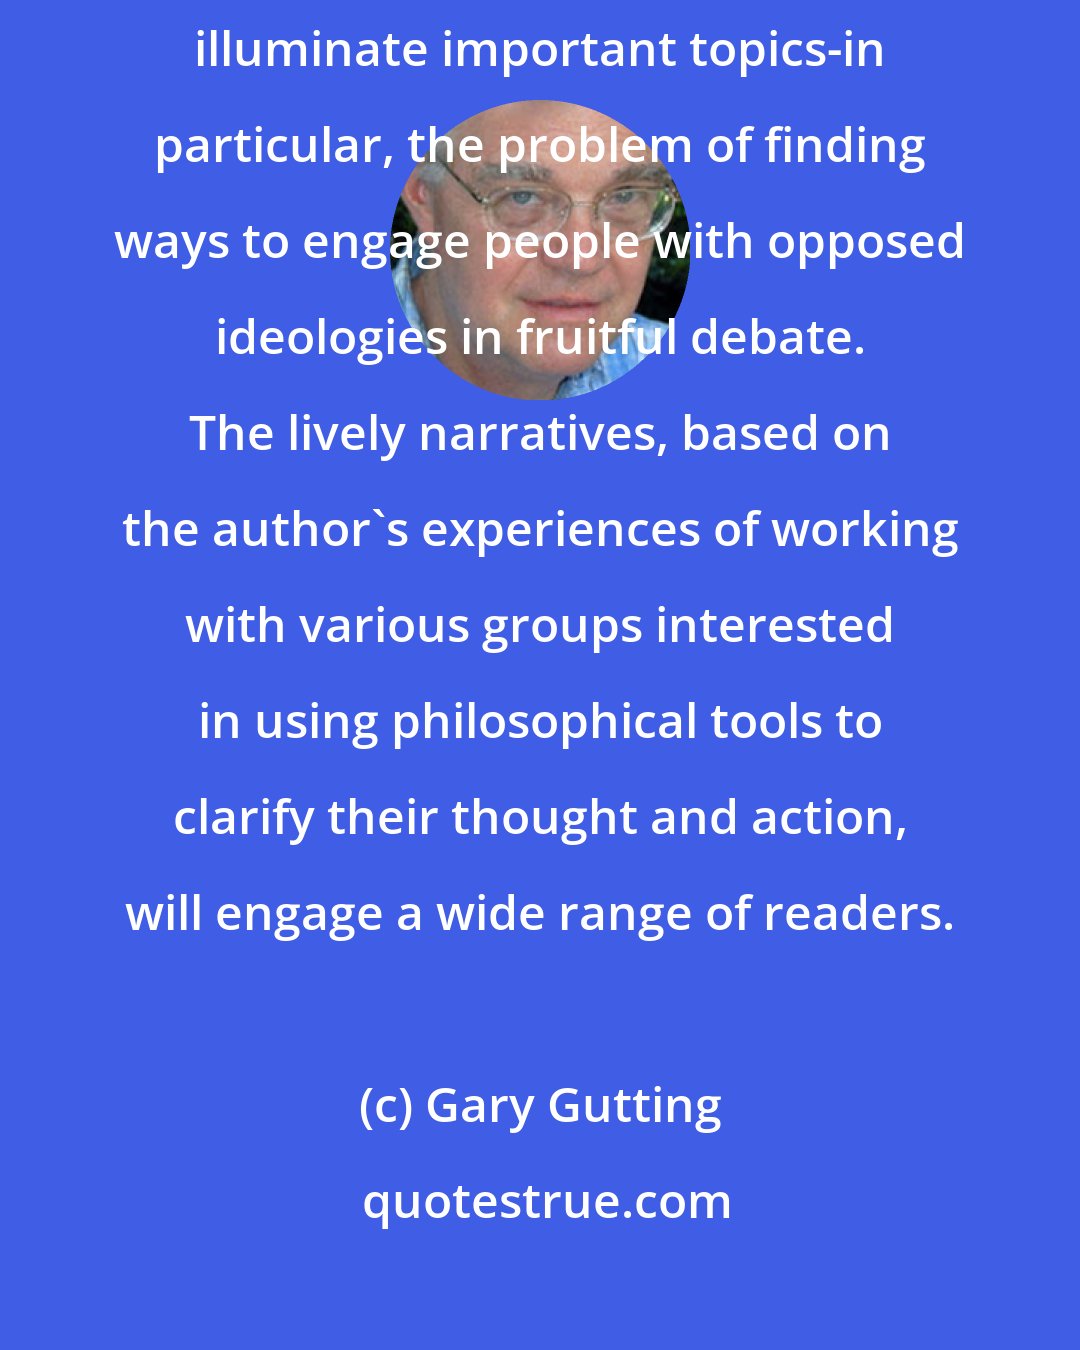 Gary Gutting: Teaching Plato in Palestine shows how philosophical thinking can illuminate important topics-in particular, the problem of finding ways to engage people with opposed ideologies in fruitful debate. The lively narratives, based on the author's experiences of working with various groups interested in using philosophical tools to clarify their thought and action, will engage a wide range of readers.